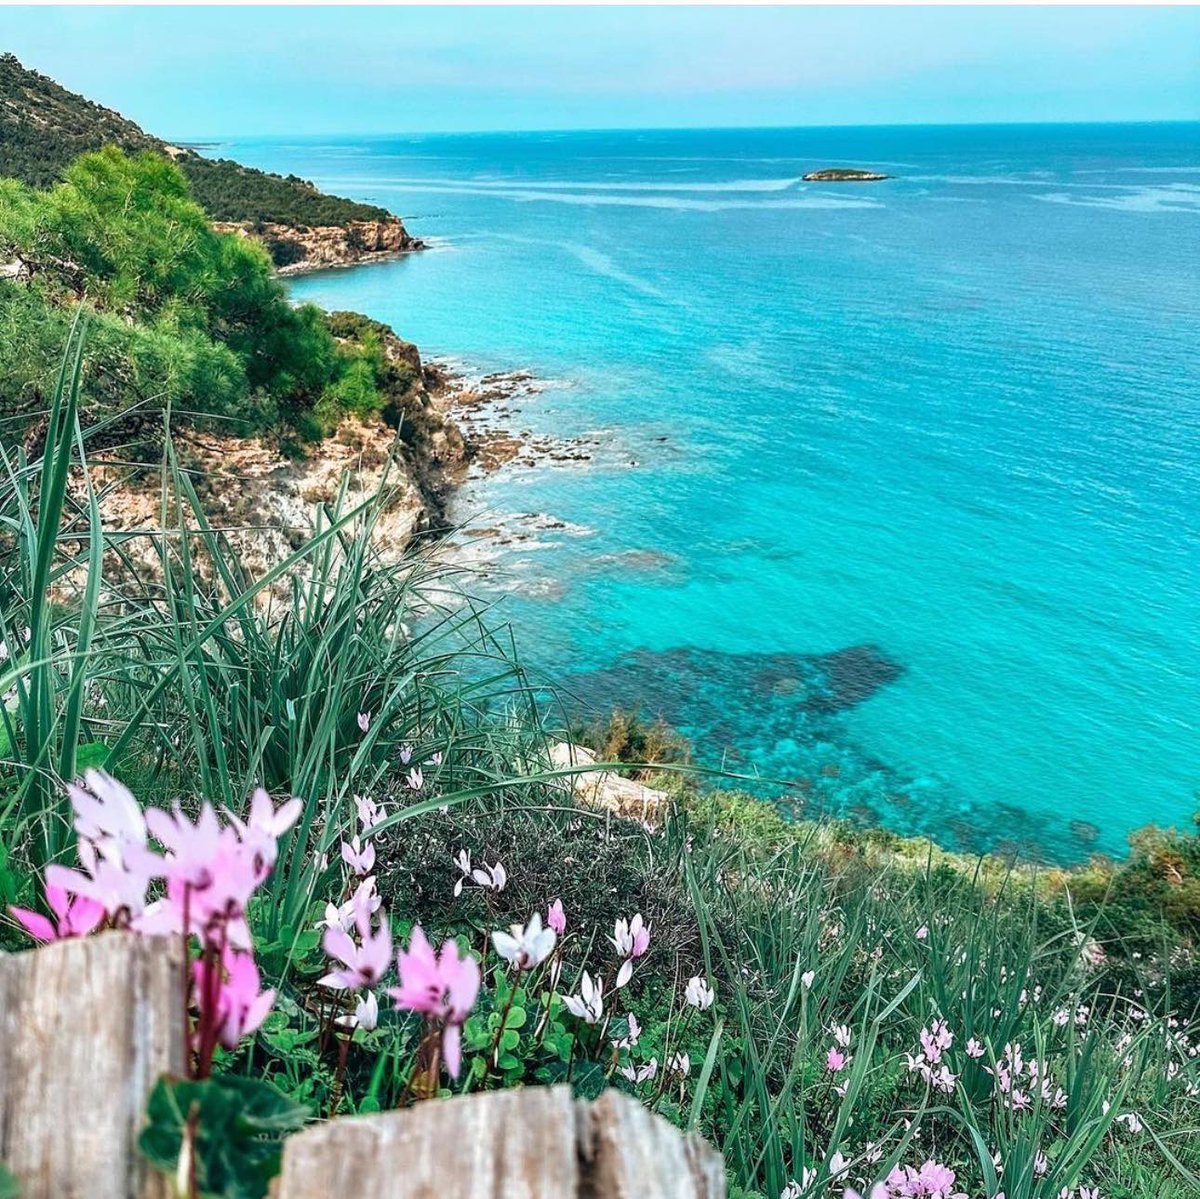 🌸 Hello April! 🌼 We welcome a month filled with blooming flowers, warmer days, and endless possibilities. @absolutelylucy #Cyprusairports #HermesAirports #Spring #Travel #Cyprus